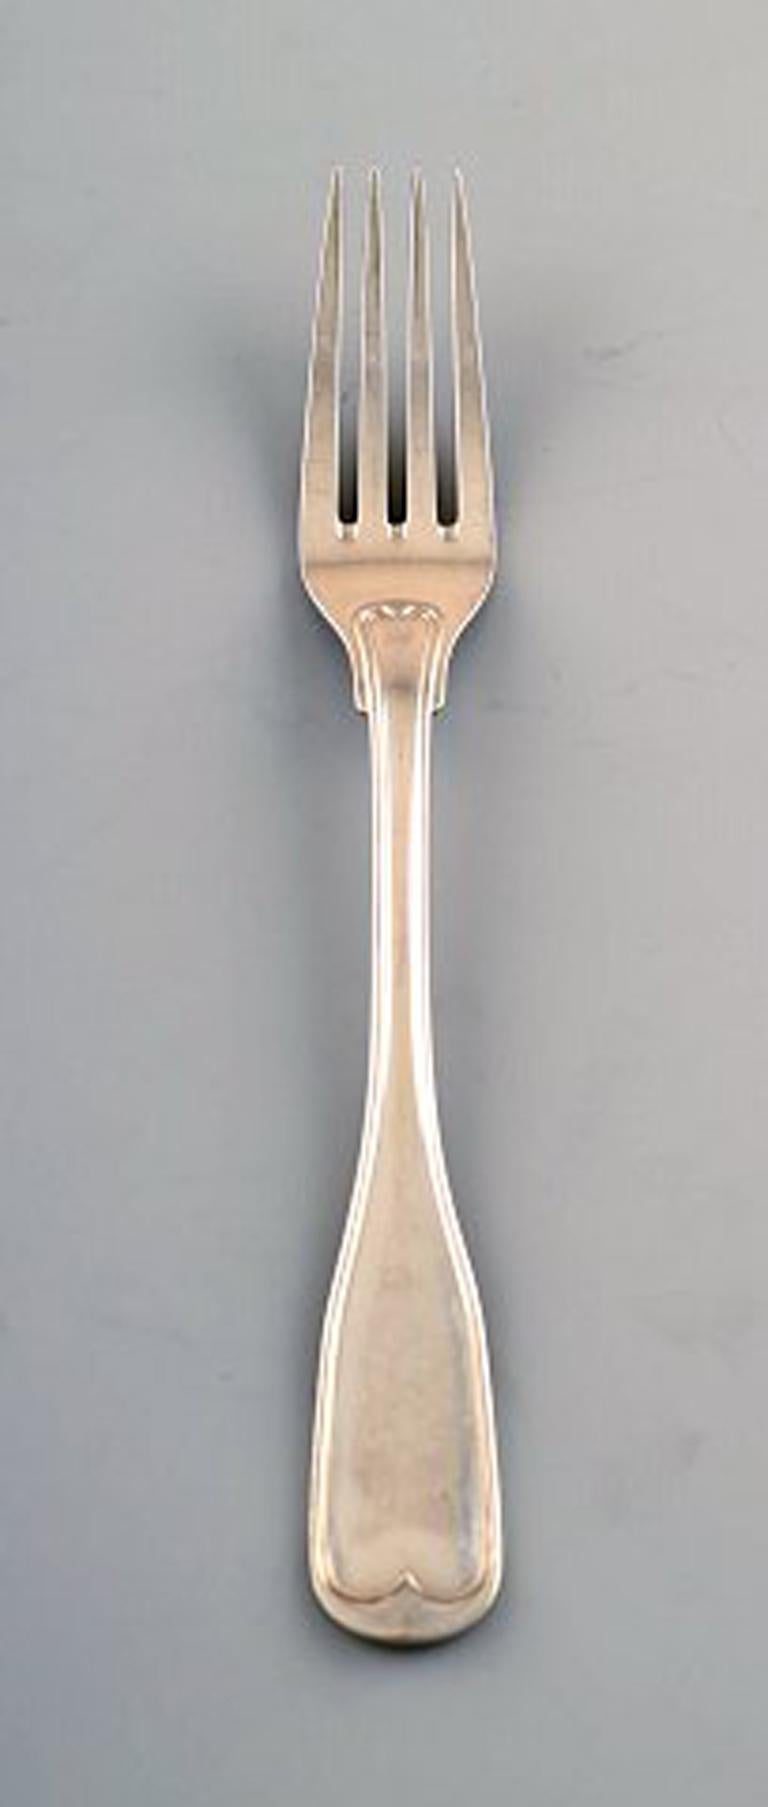 Ten dinner forks, Old rifled, Danish silver 0.830.
Guardein: Jens Sigsgaard.
Measures: 18 cm.
In very good condition.
Stamped. 1940s.